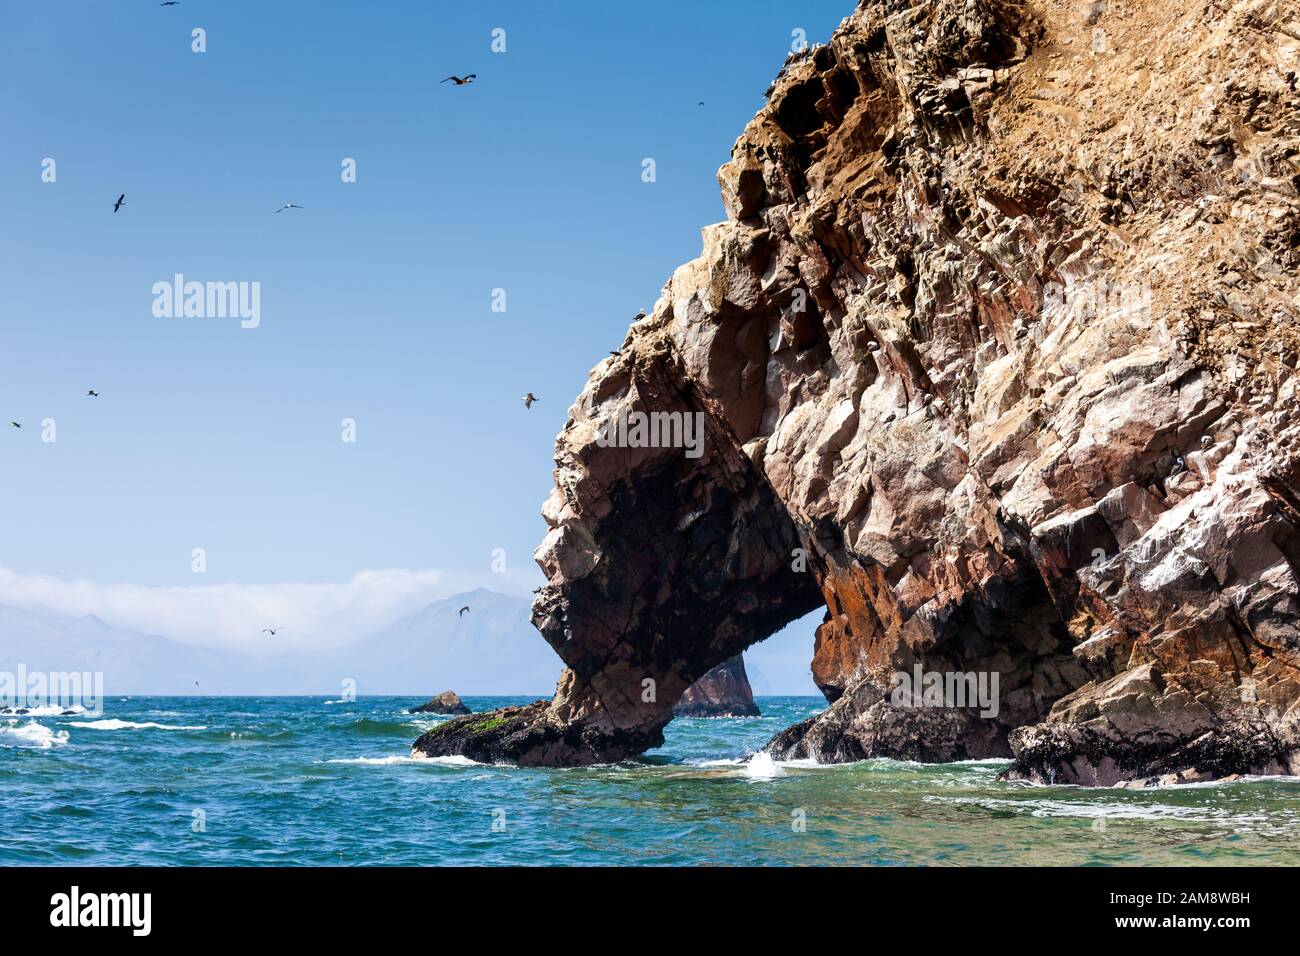 A rock with a grotto overlooking the sea, seagulls fly around, mountains, Ballestas Islands are visible in the distance, Paracas reserv, Peru, Latin Stock Photo